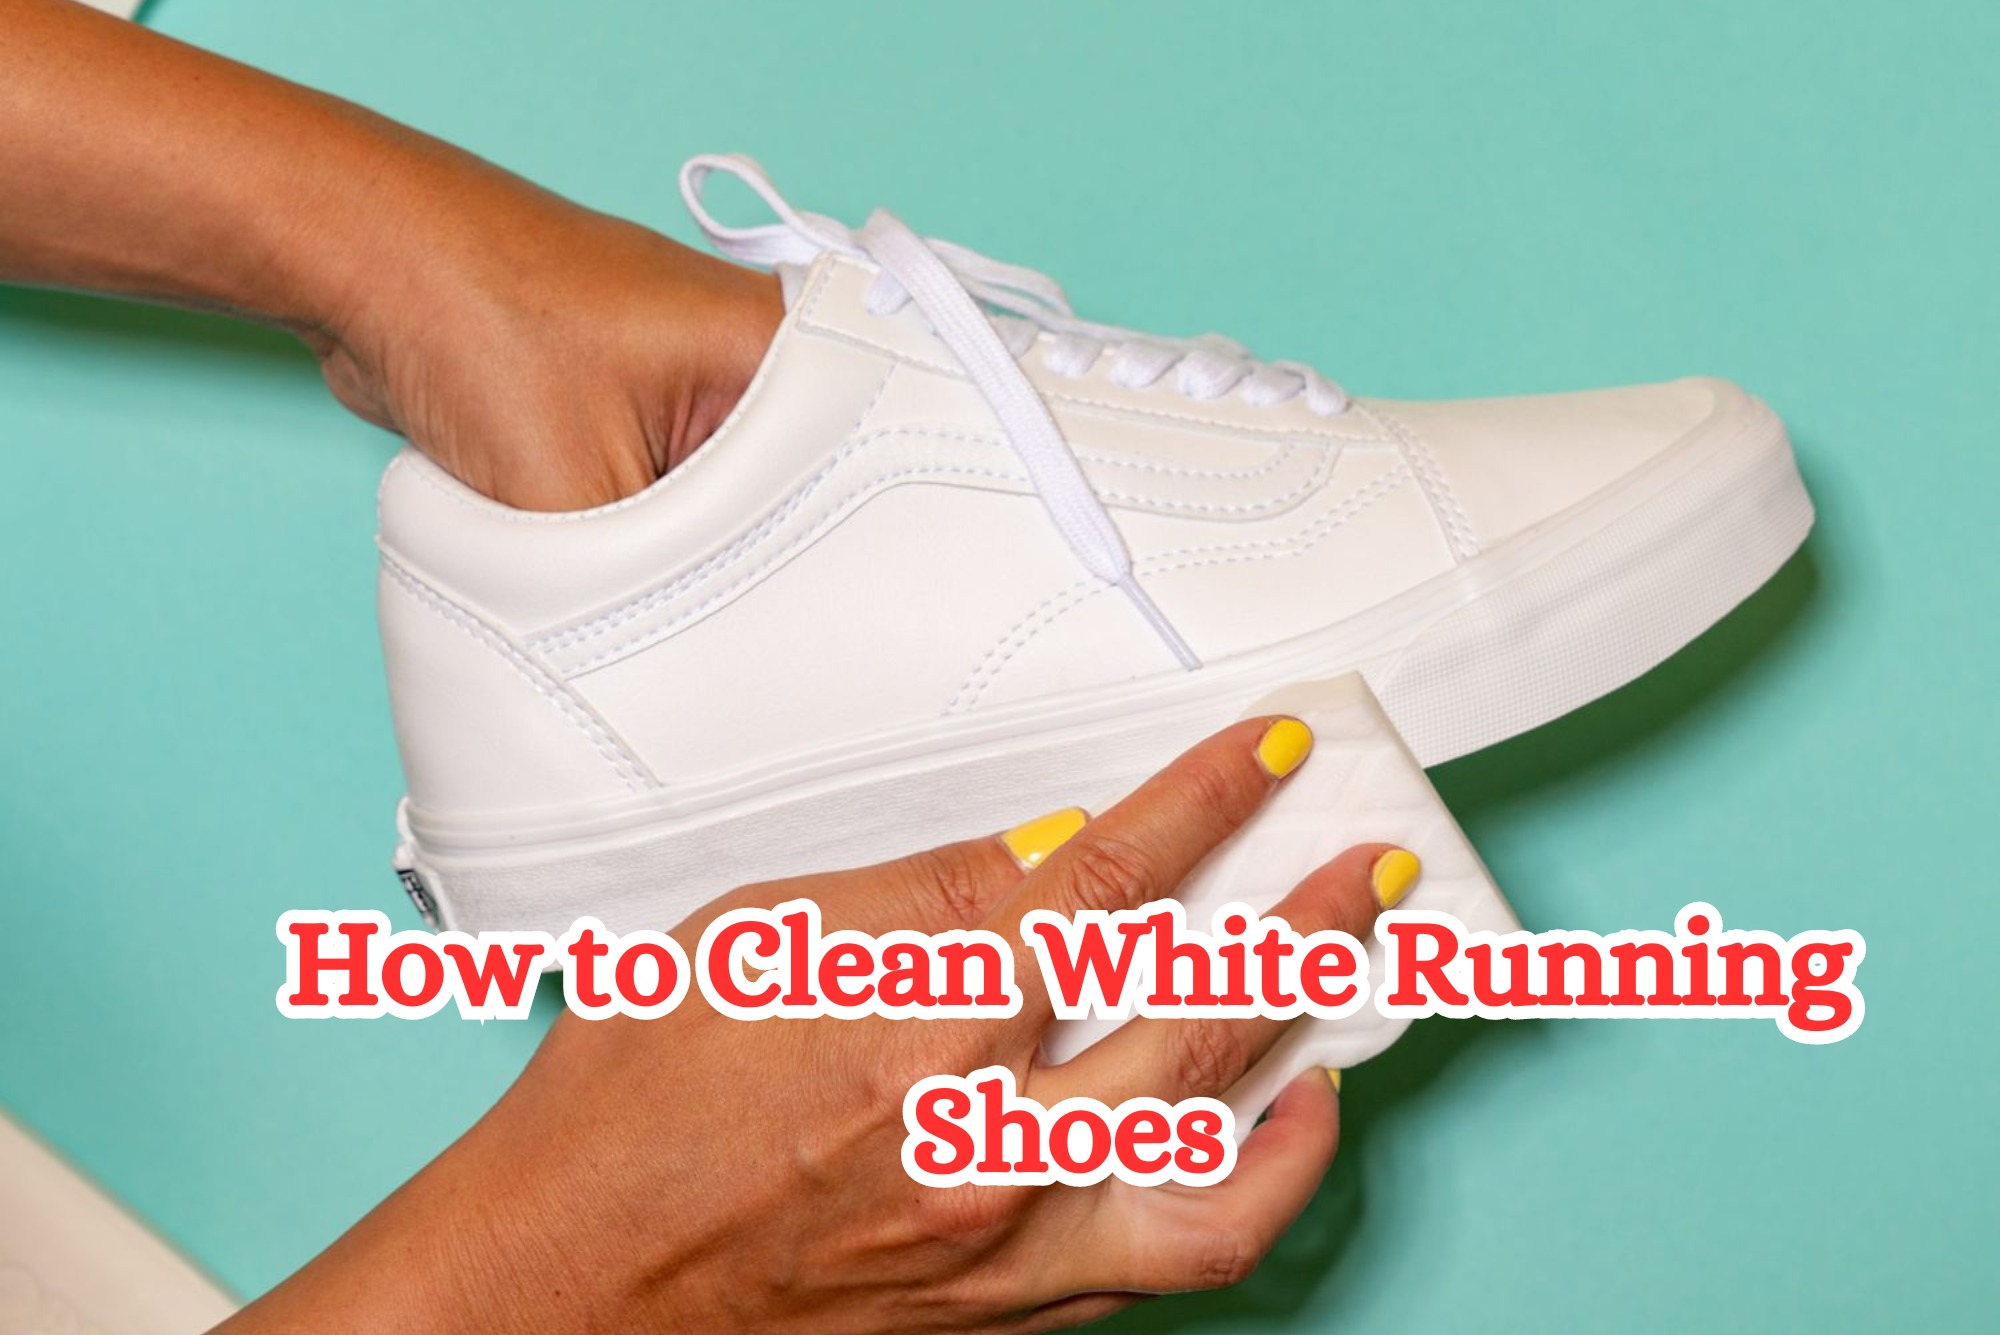 How to Clean White Running Shoes